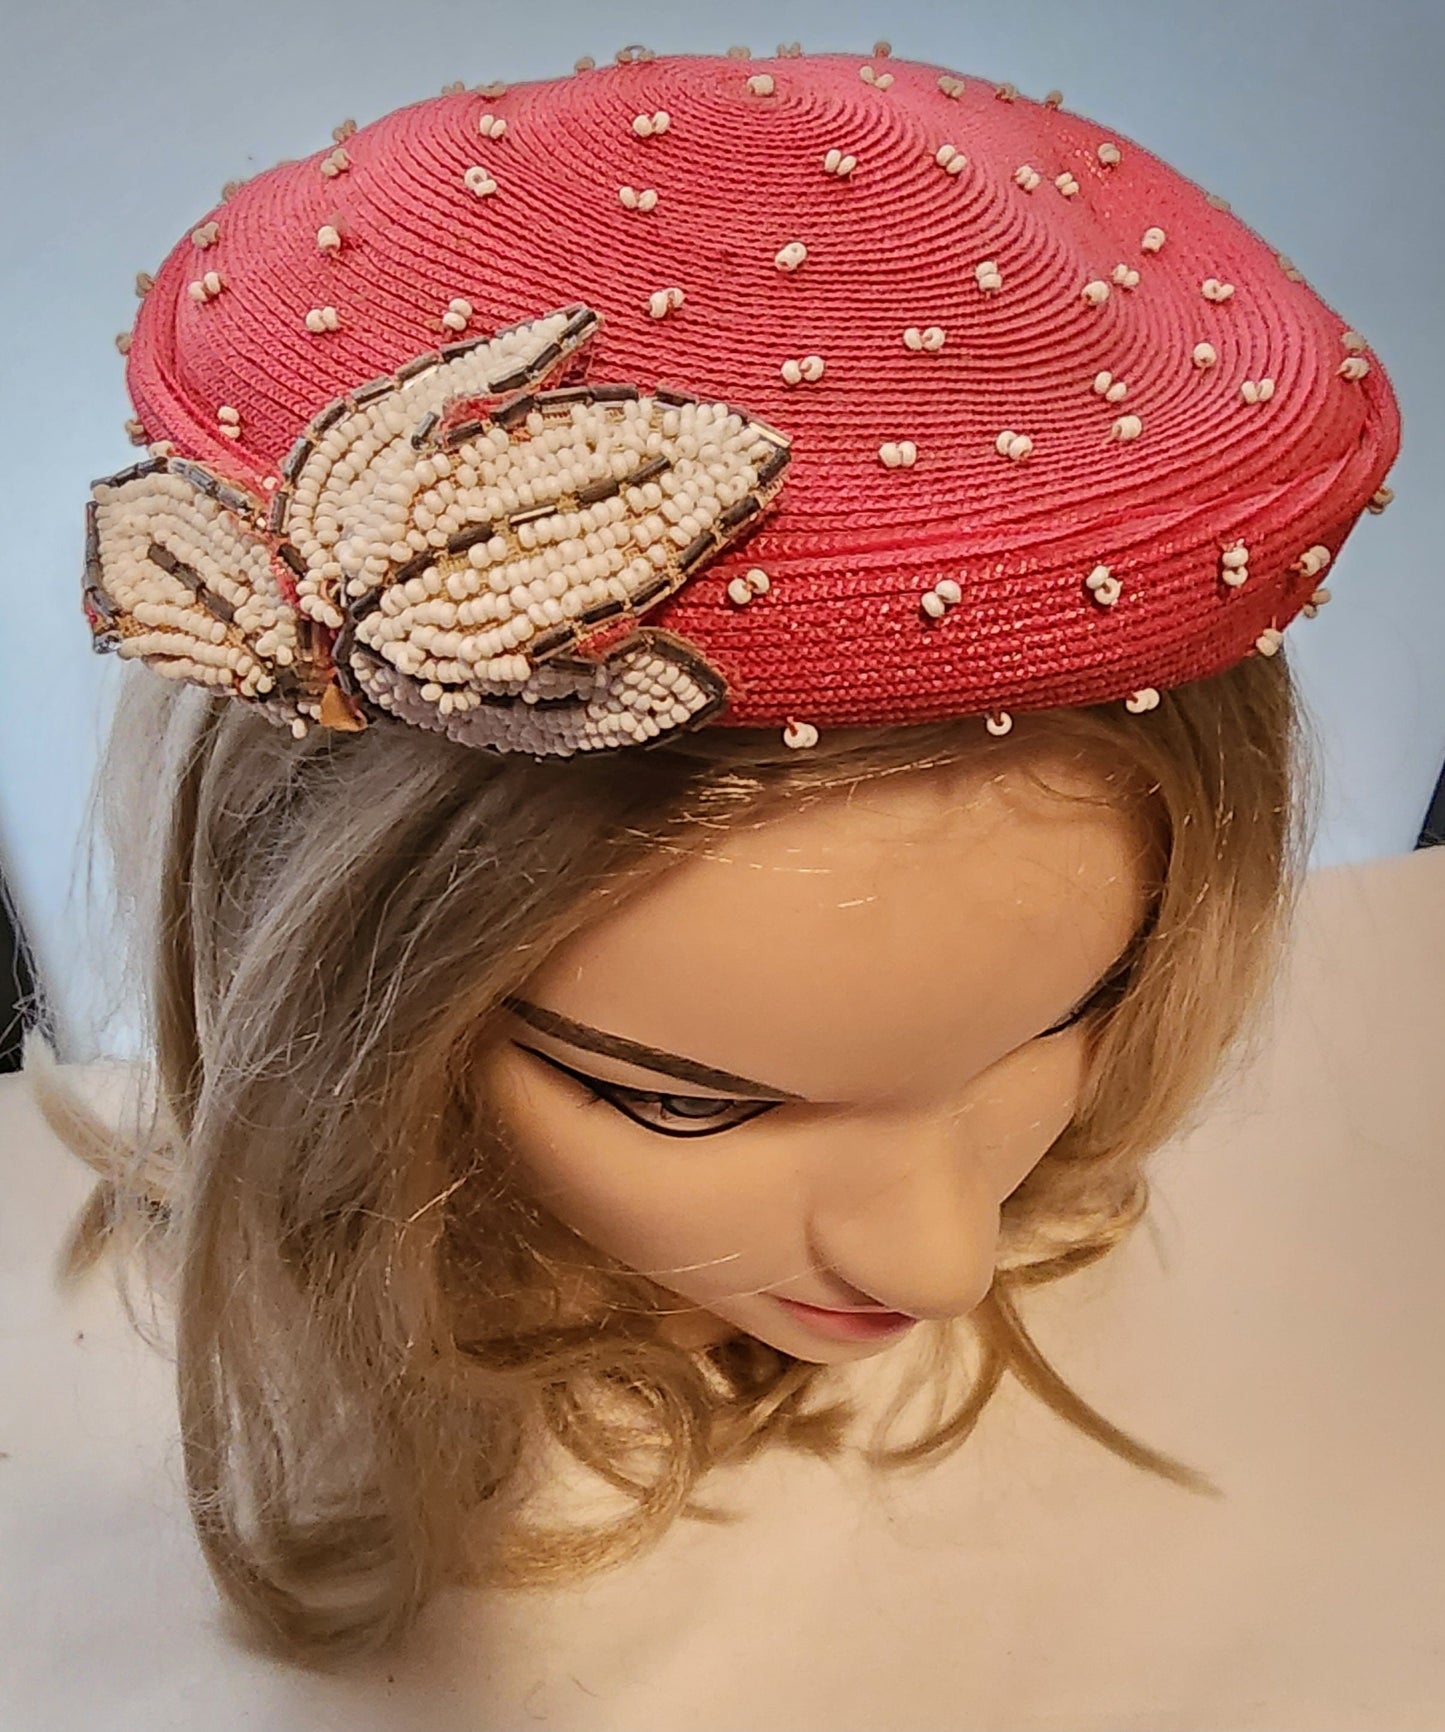 Vintage 1950s Hat Small Round Dark Pink Perch Hat White Glass Seed Bead Leaf Ornament Lecie Mid Century Rockabilly 22 in.